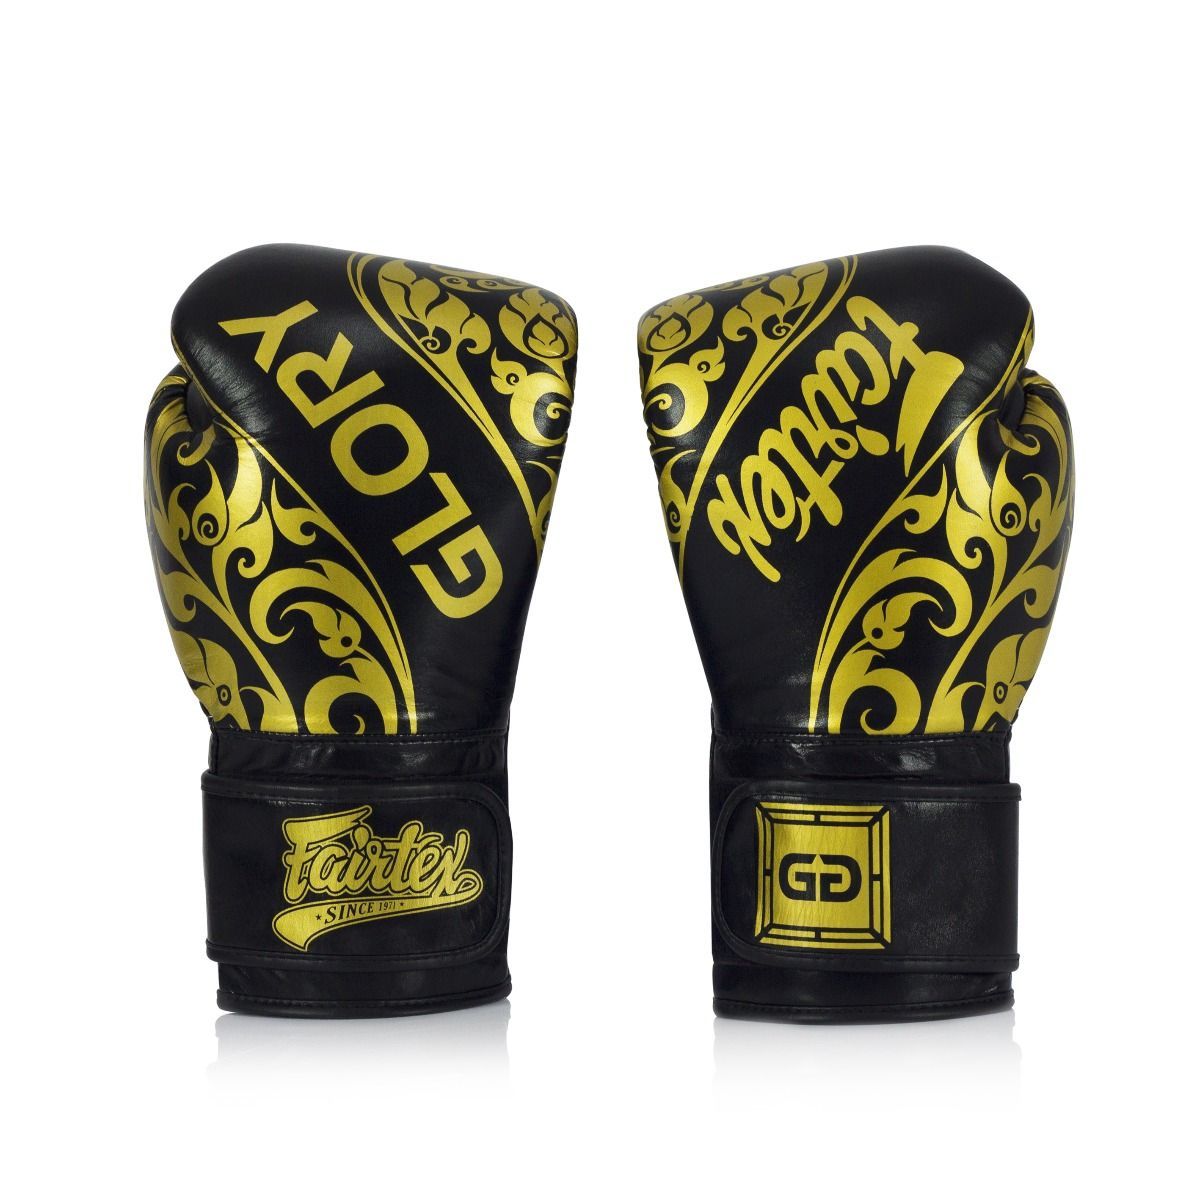 Boxing Gloves in Leather Limited Edition Glory